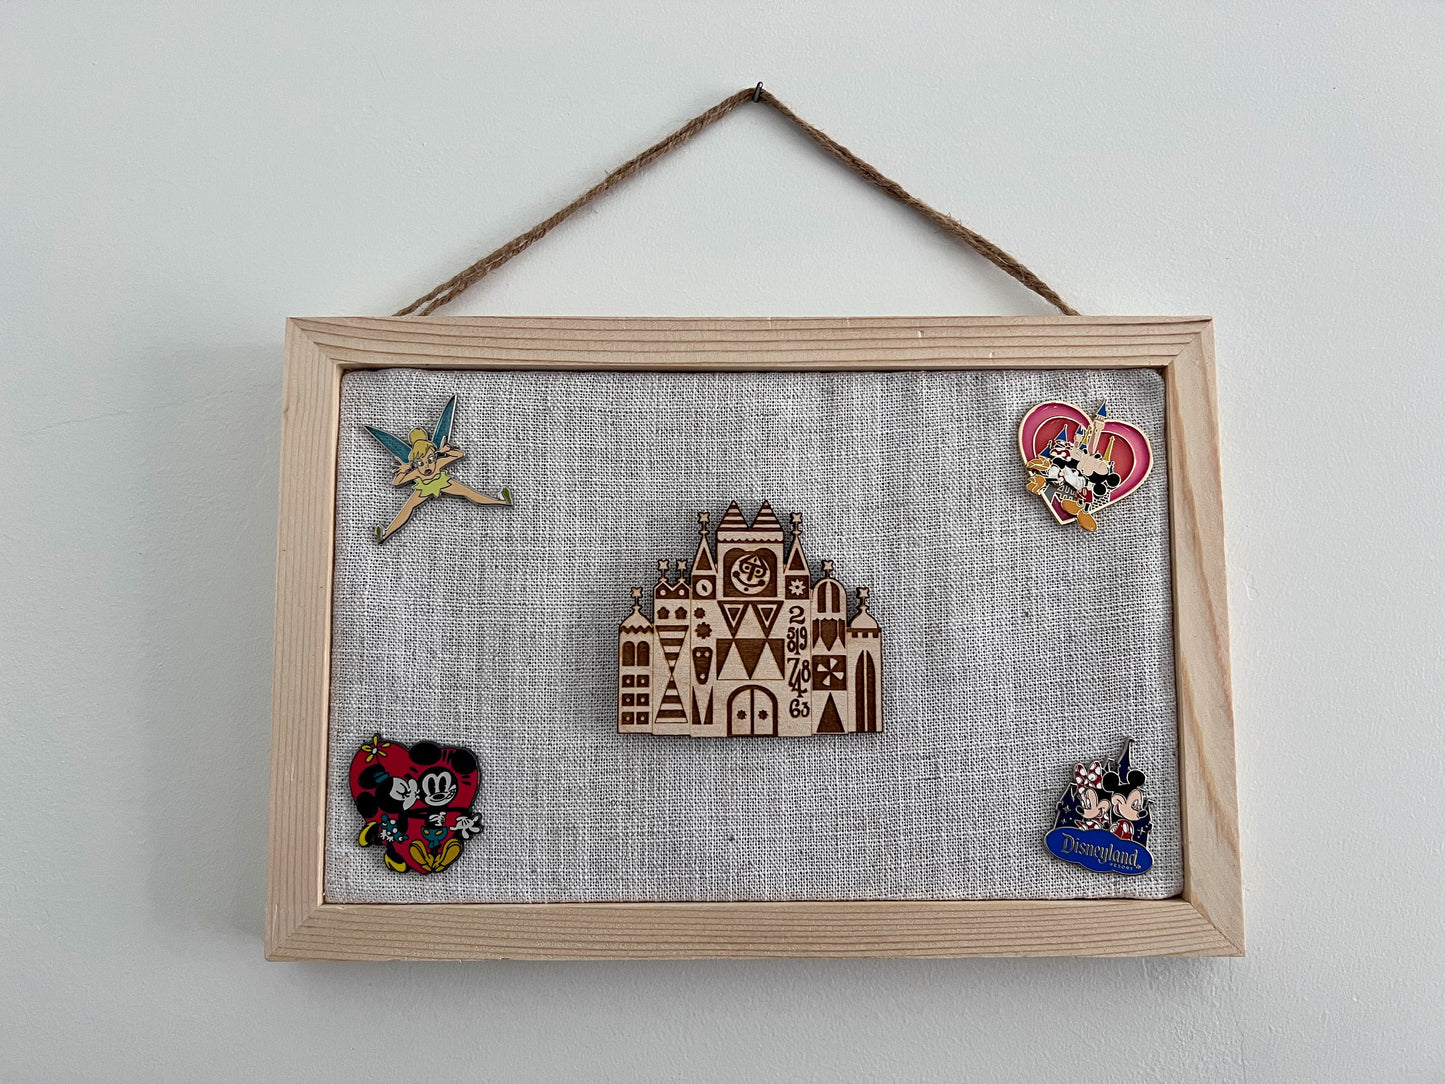 Pin Trading Board Small World, perfect for Pin Traders to display those Disney hidden mickey pins